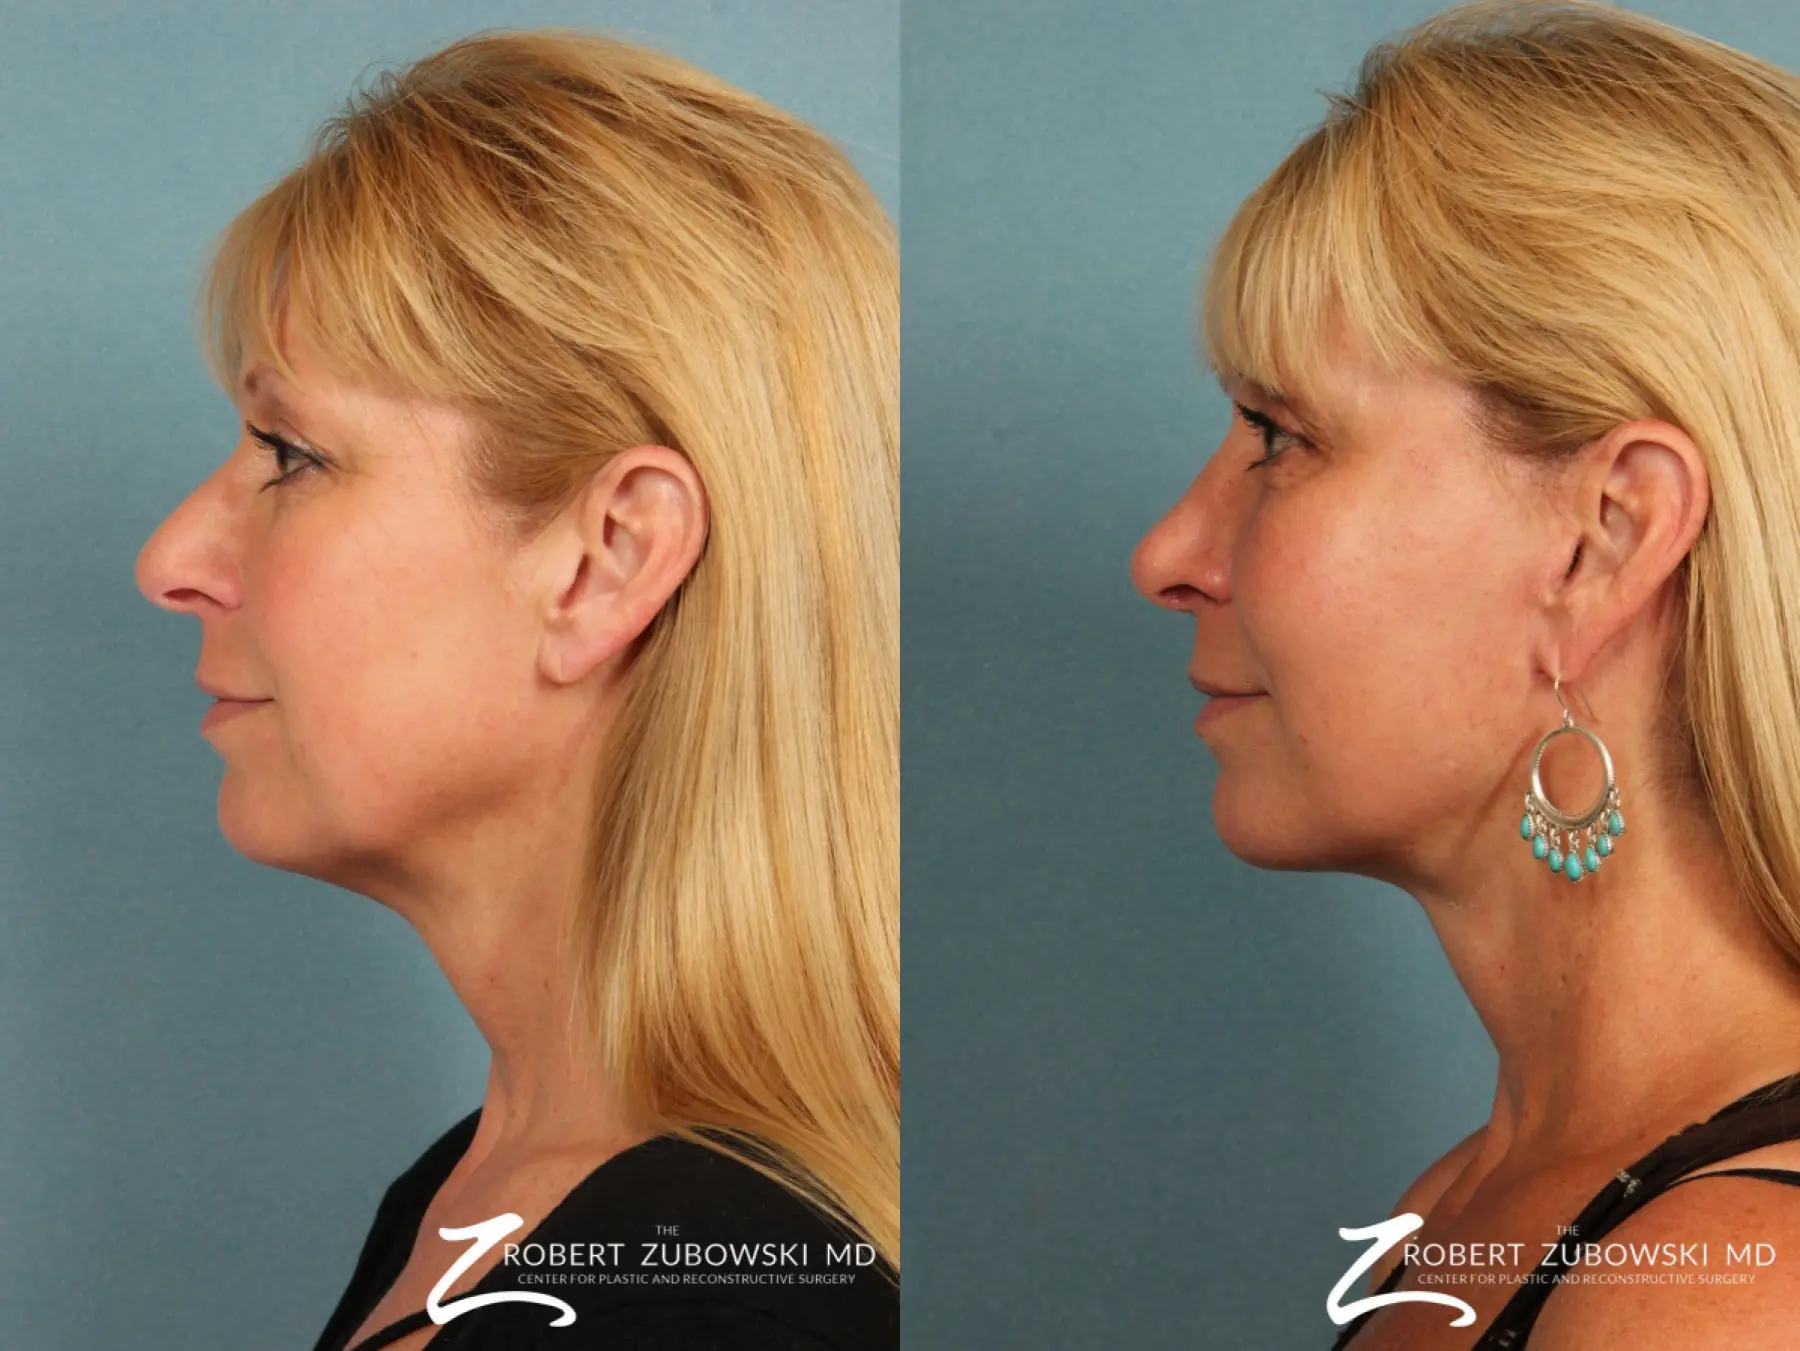 Facelift: Patient 5 - Before and After 2